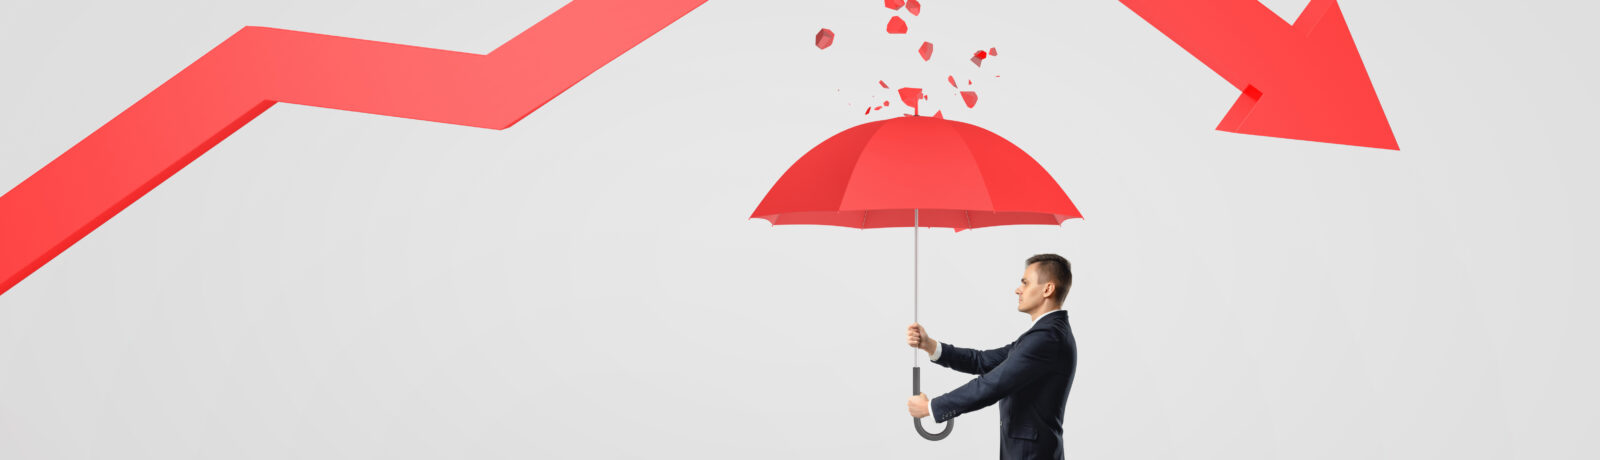 Businessman protecting himself from a broken statistical trendline with an umbrella.